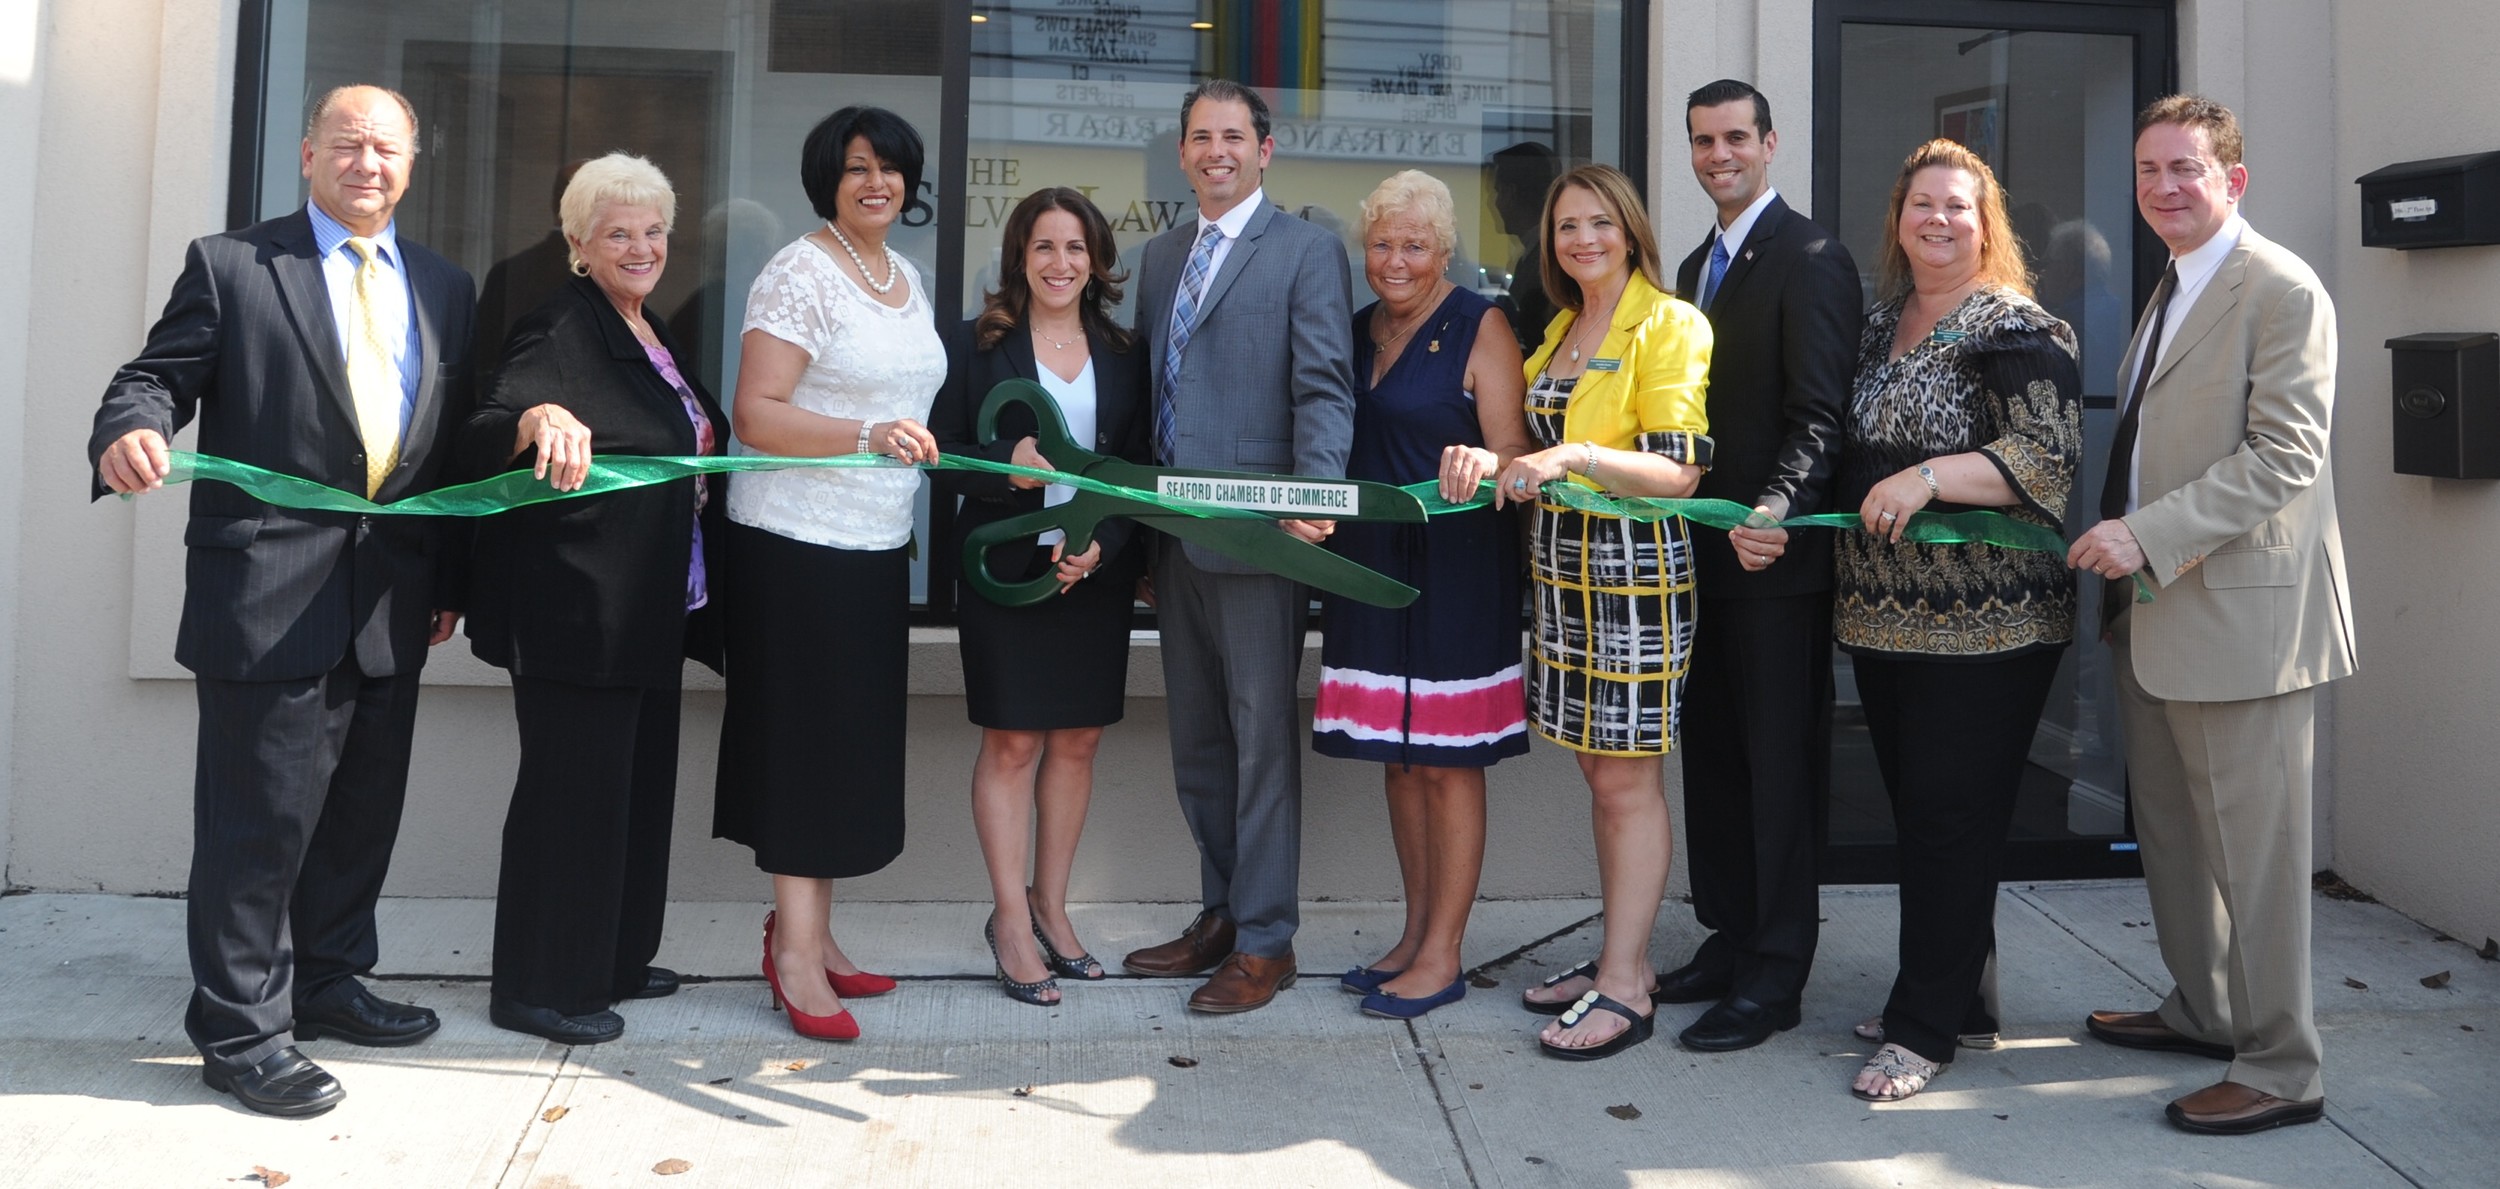 The Seaford Chamber of Commerce and locally elected officials attended the ribbon cutting ceremony for the Selvin Law Firm on July 14.